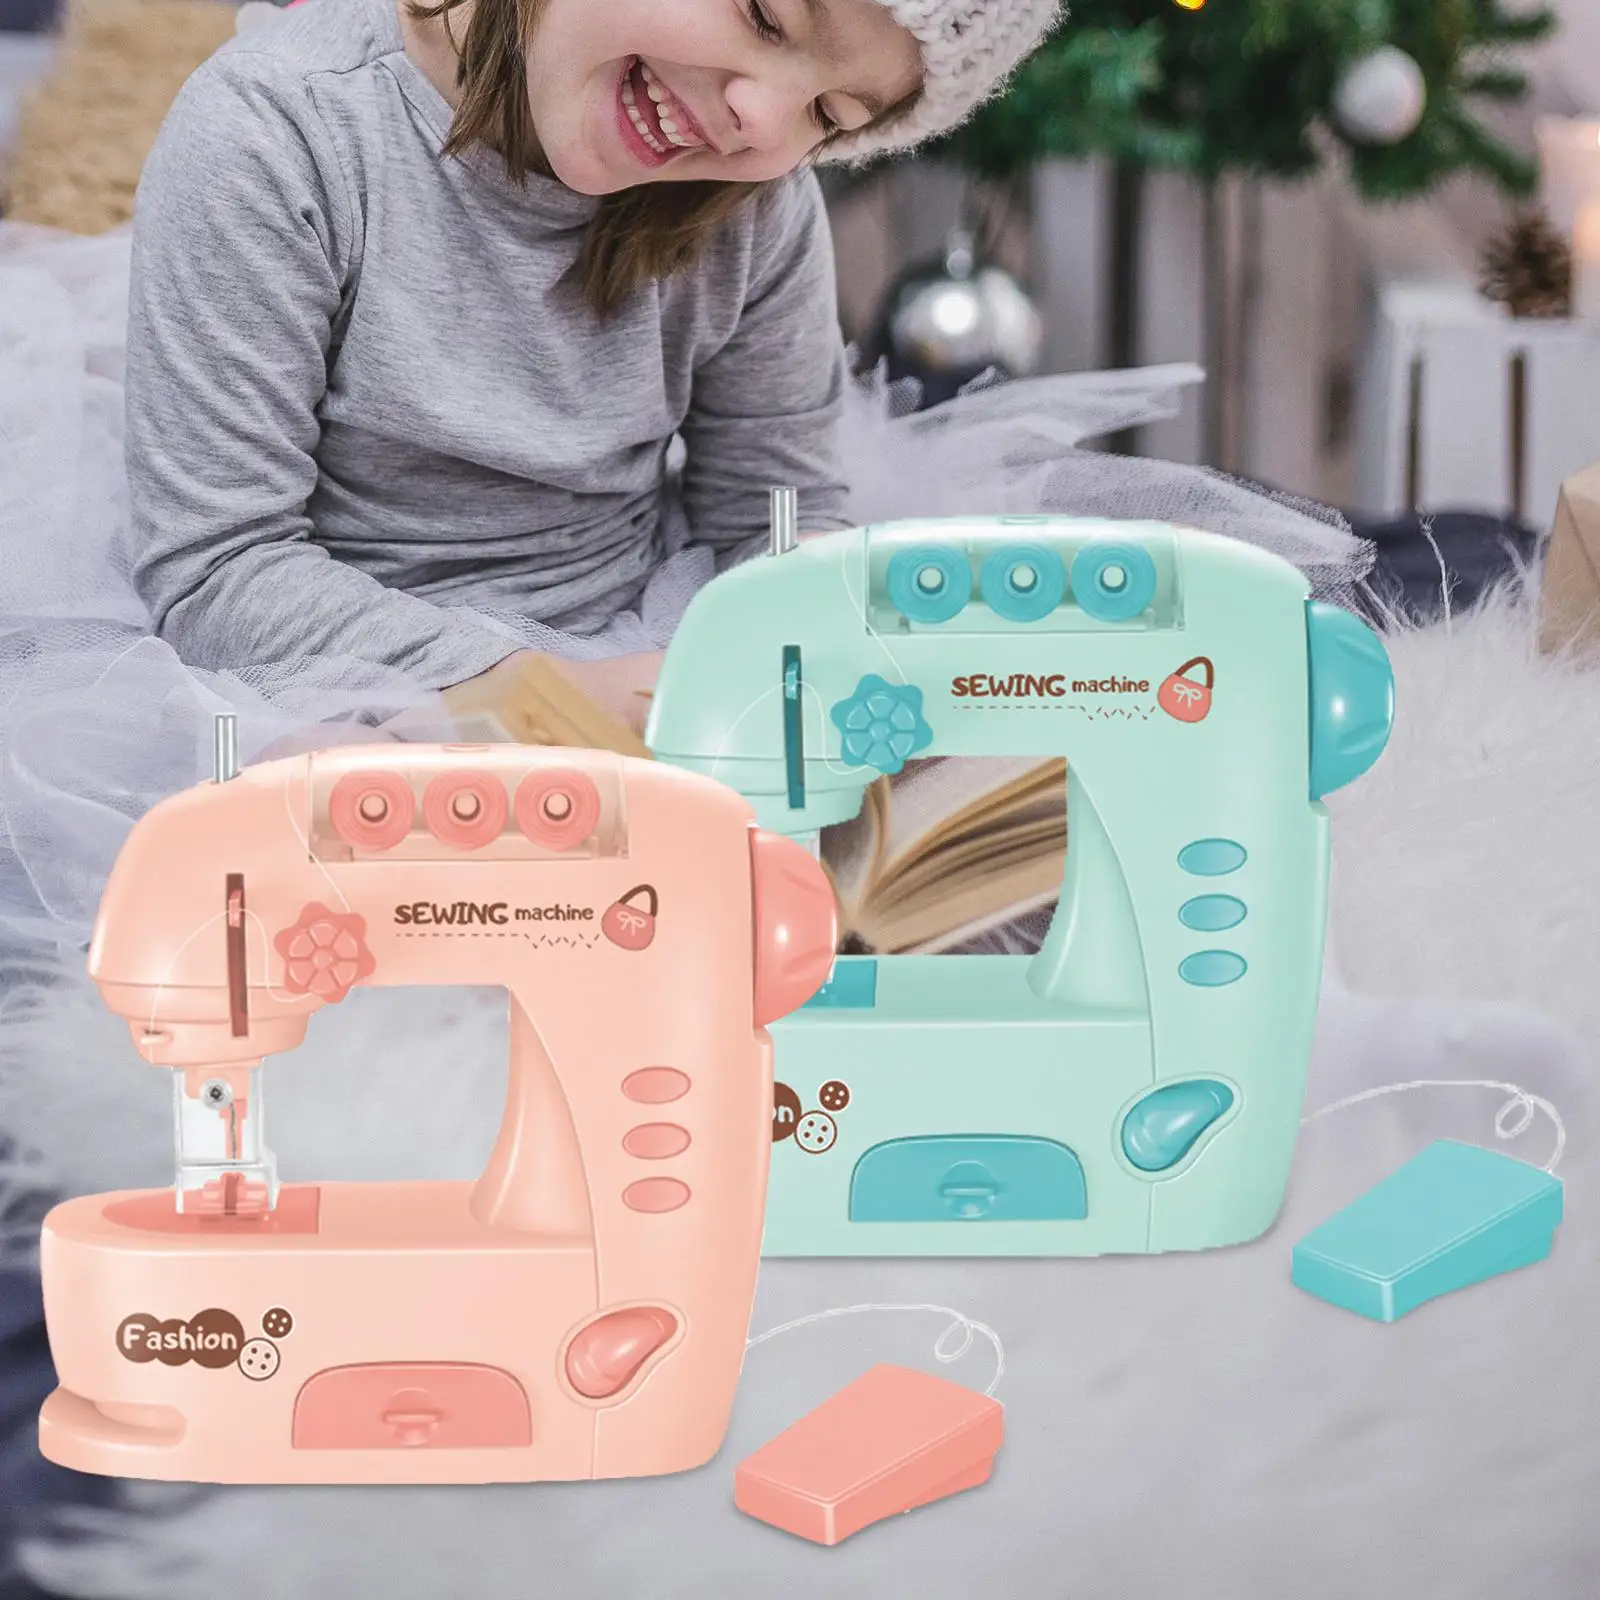 Electric Sewing Machine Household Appliance Role Play Toys for Creative Gift